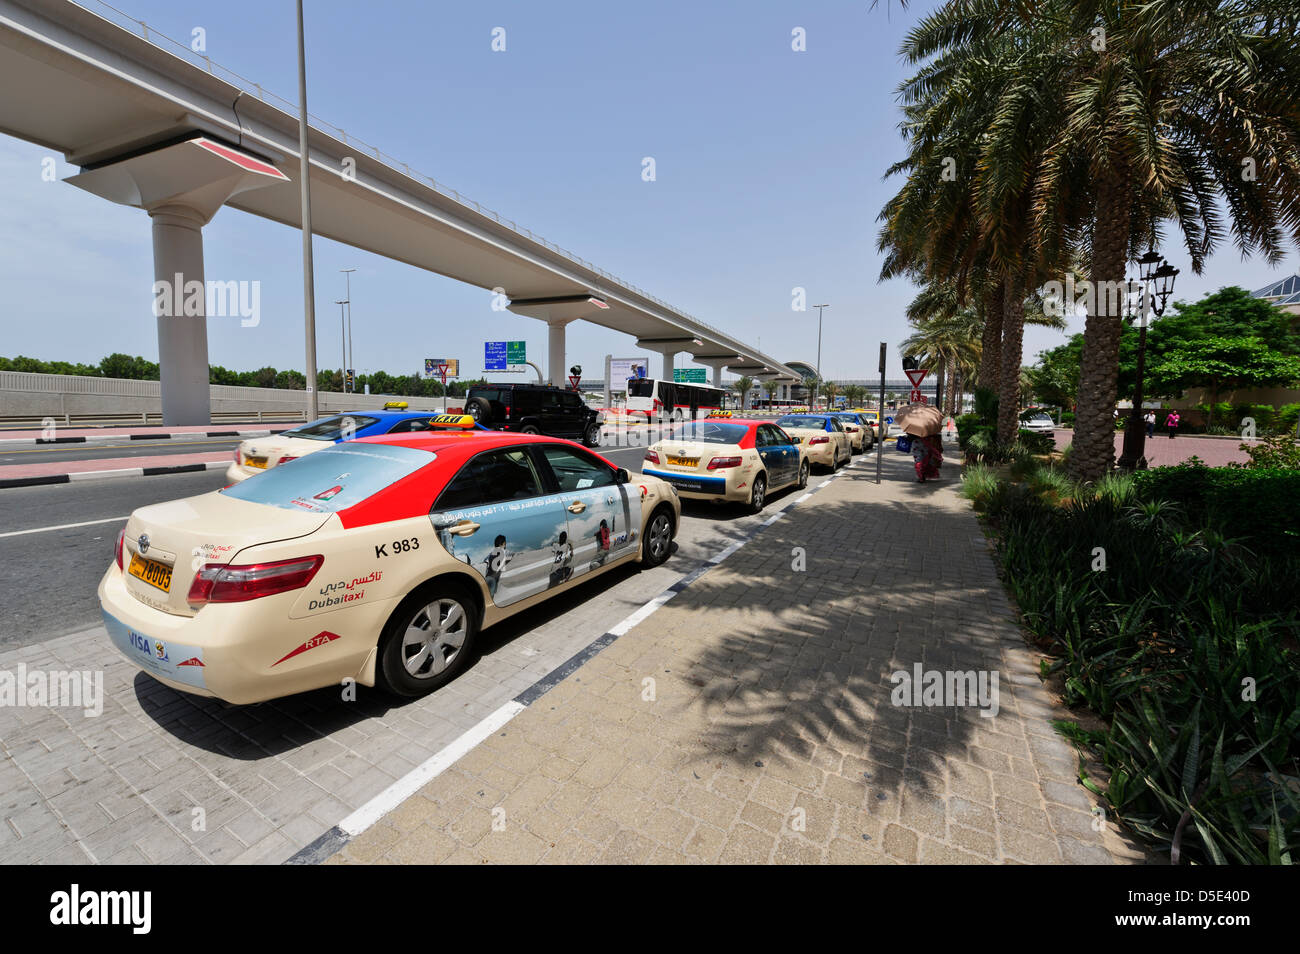 Taxi stands in front of Mall of Emirates, Dubai, United Arab Emirates. Stock Photo